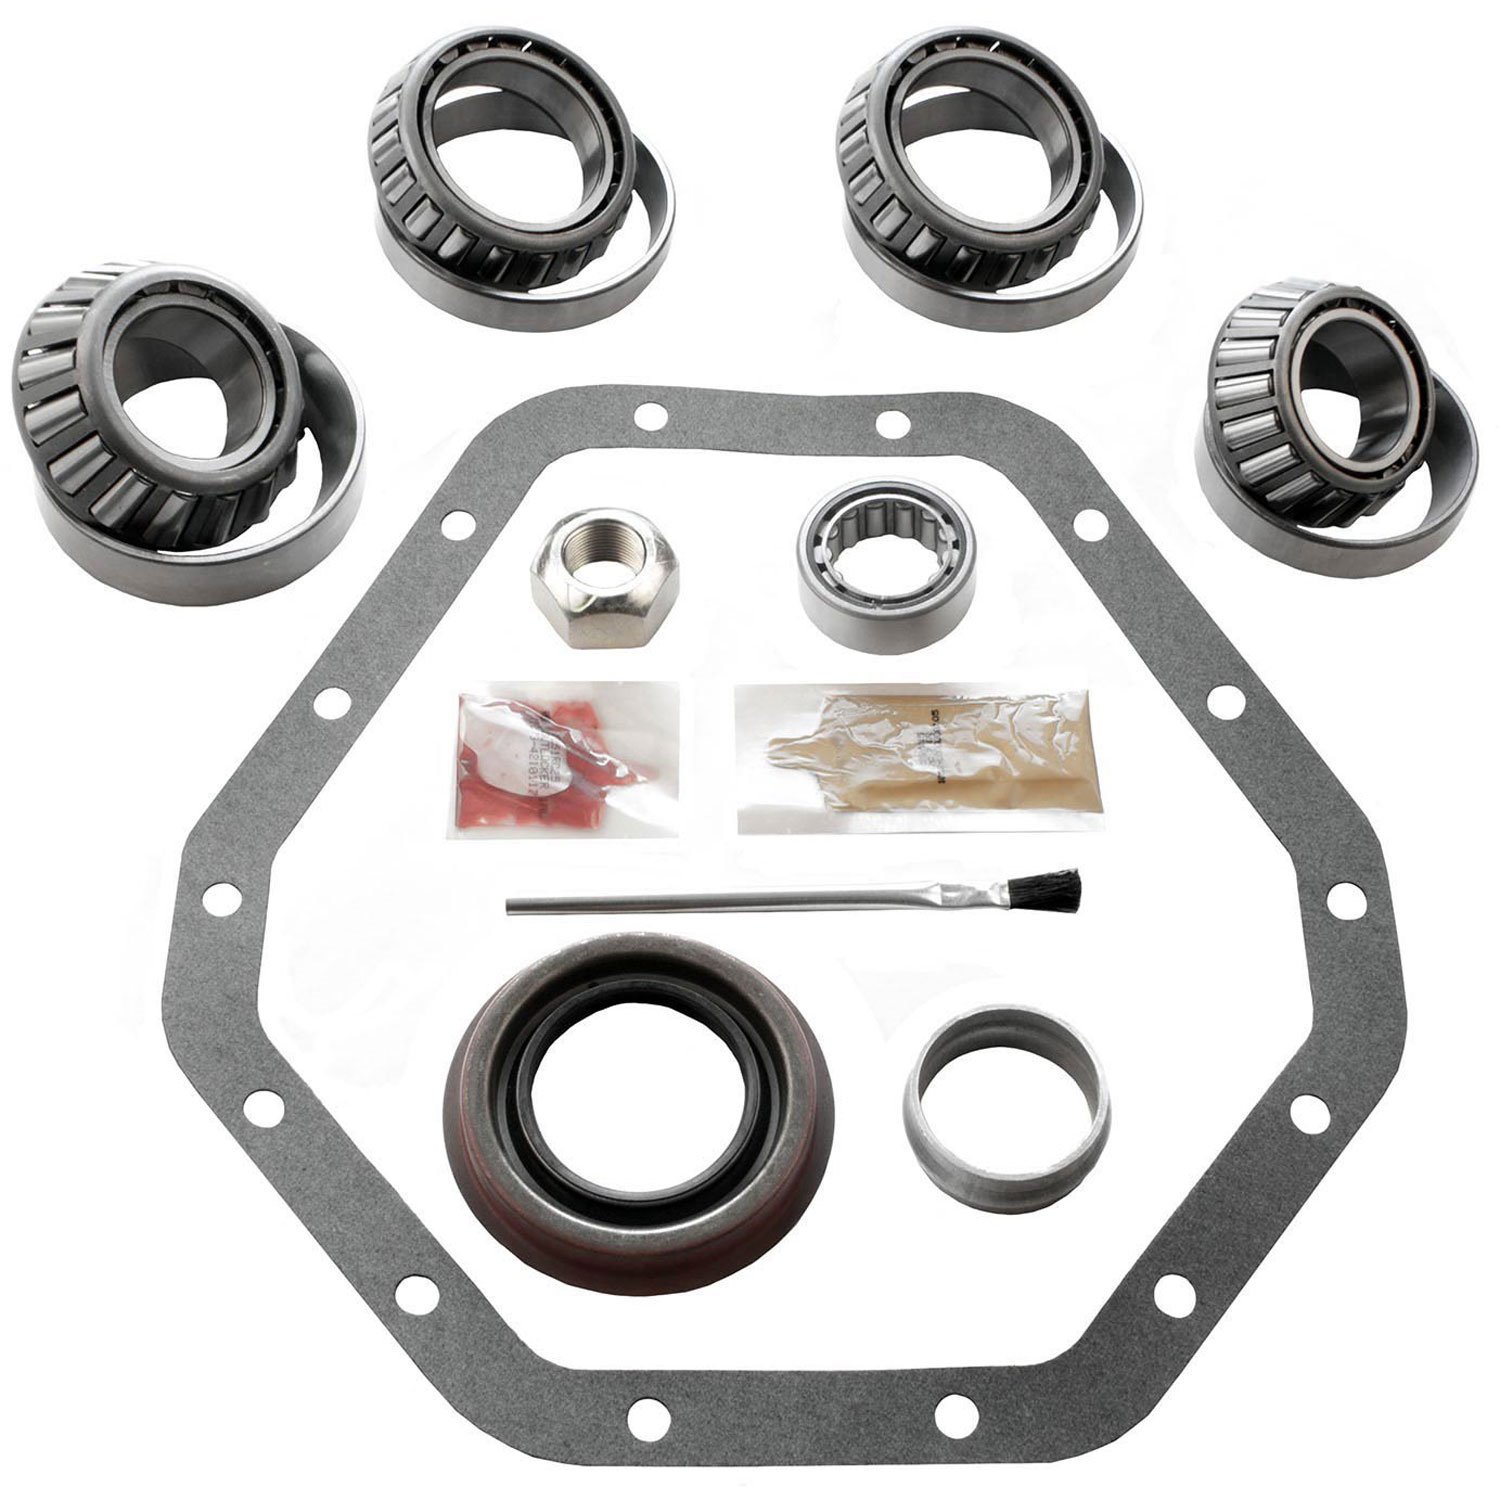 GM 10.5 BRG SEAL KIT LATE 88-9T